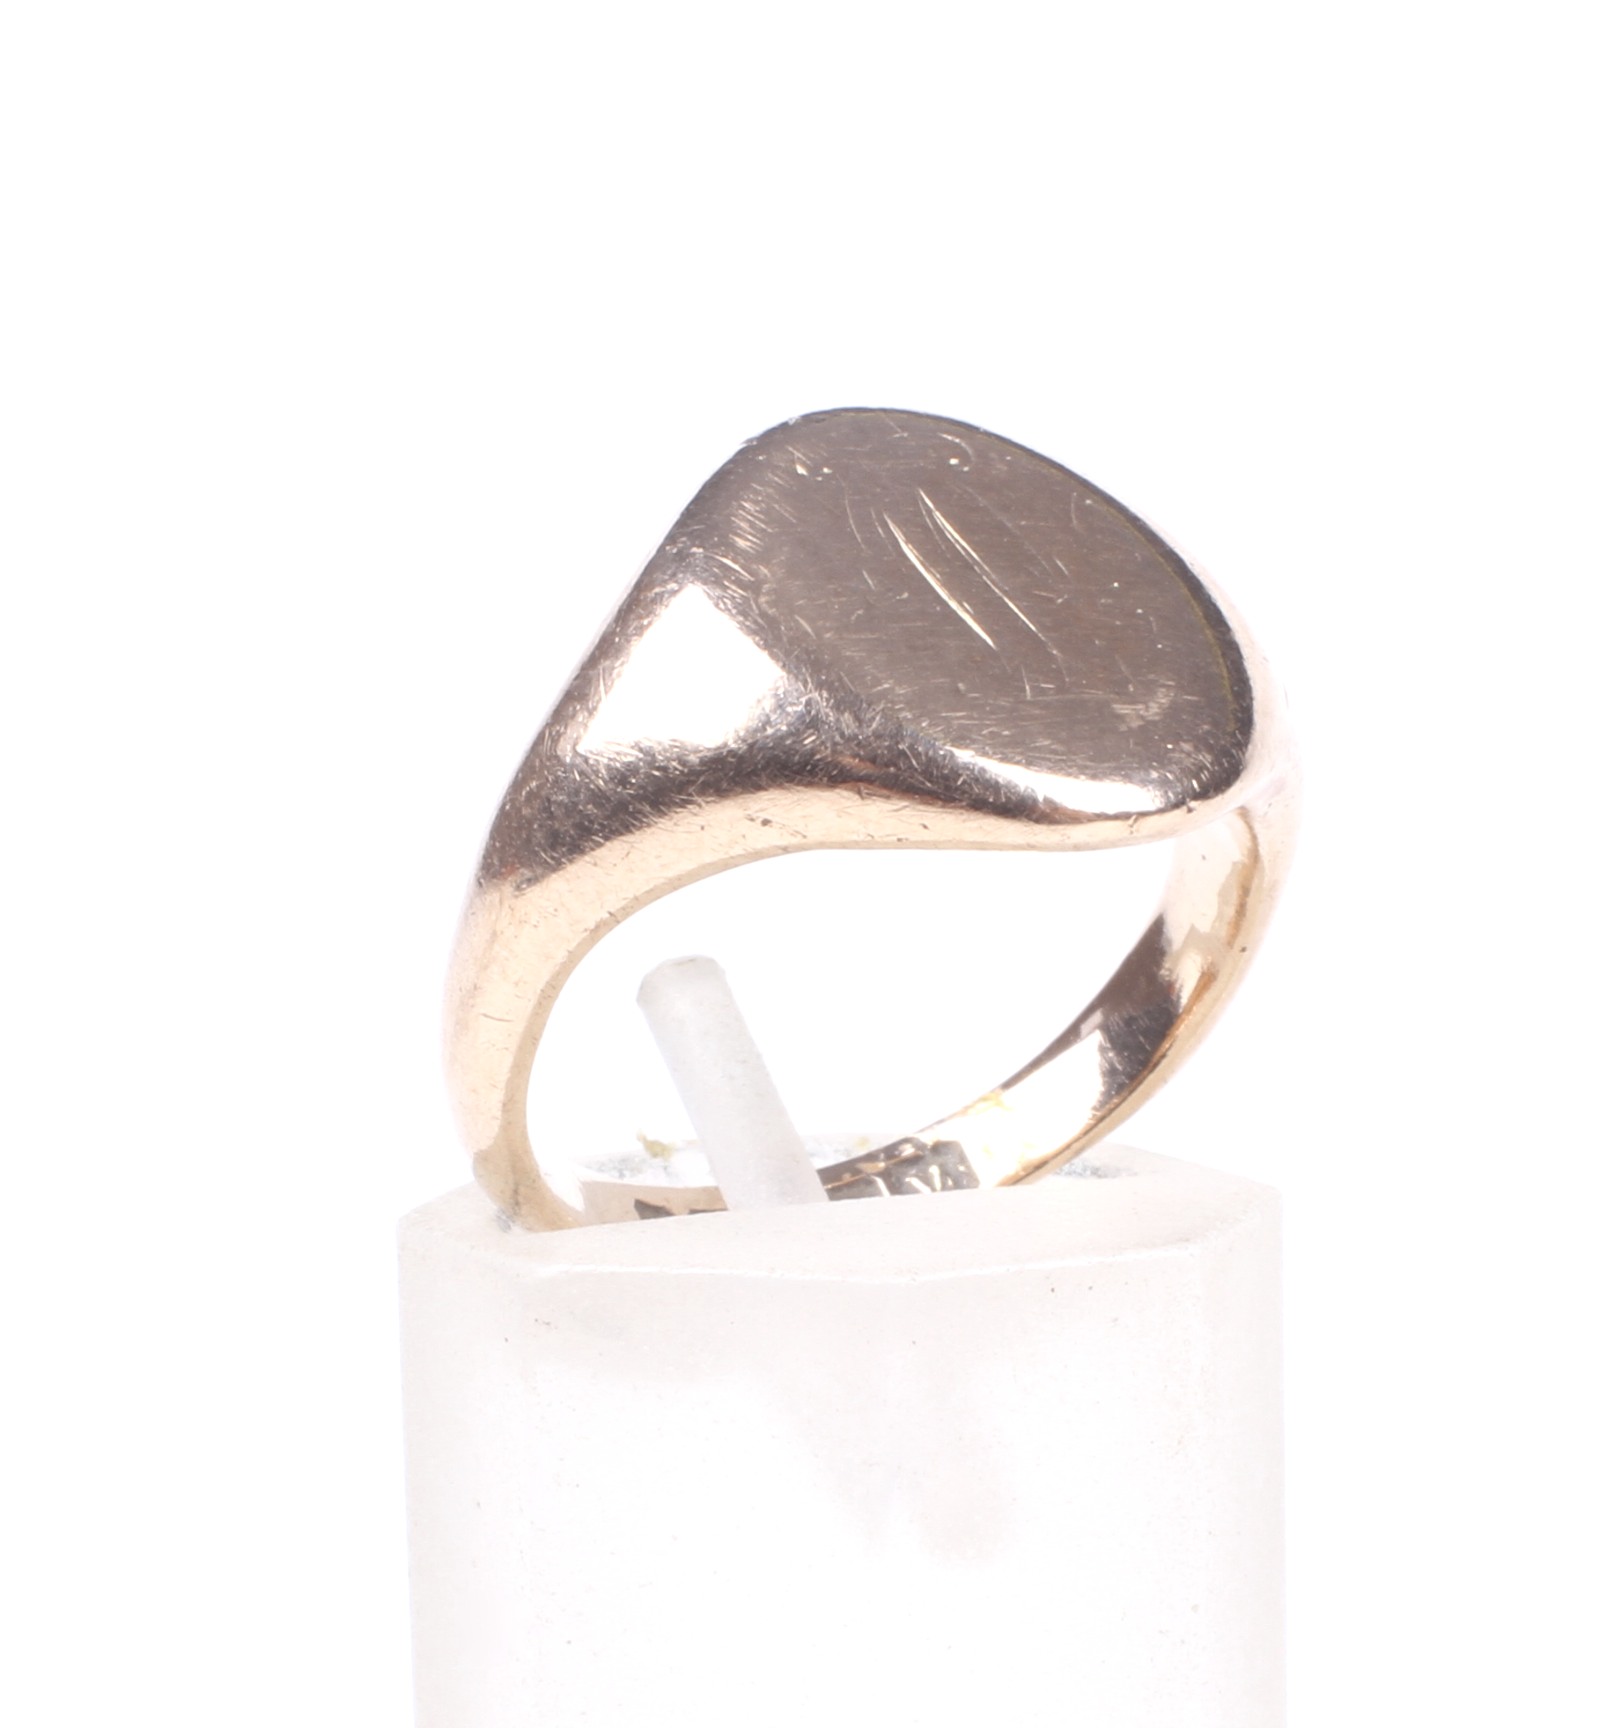 A mid-20th century 9ct rose gold oval signet ring.